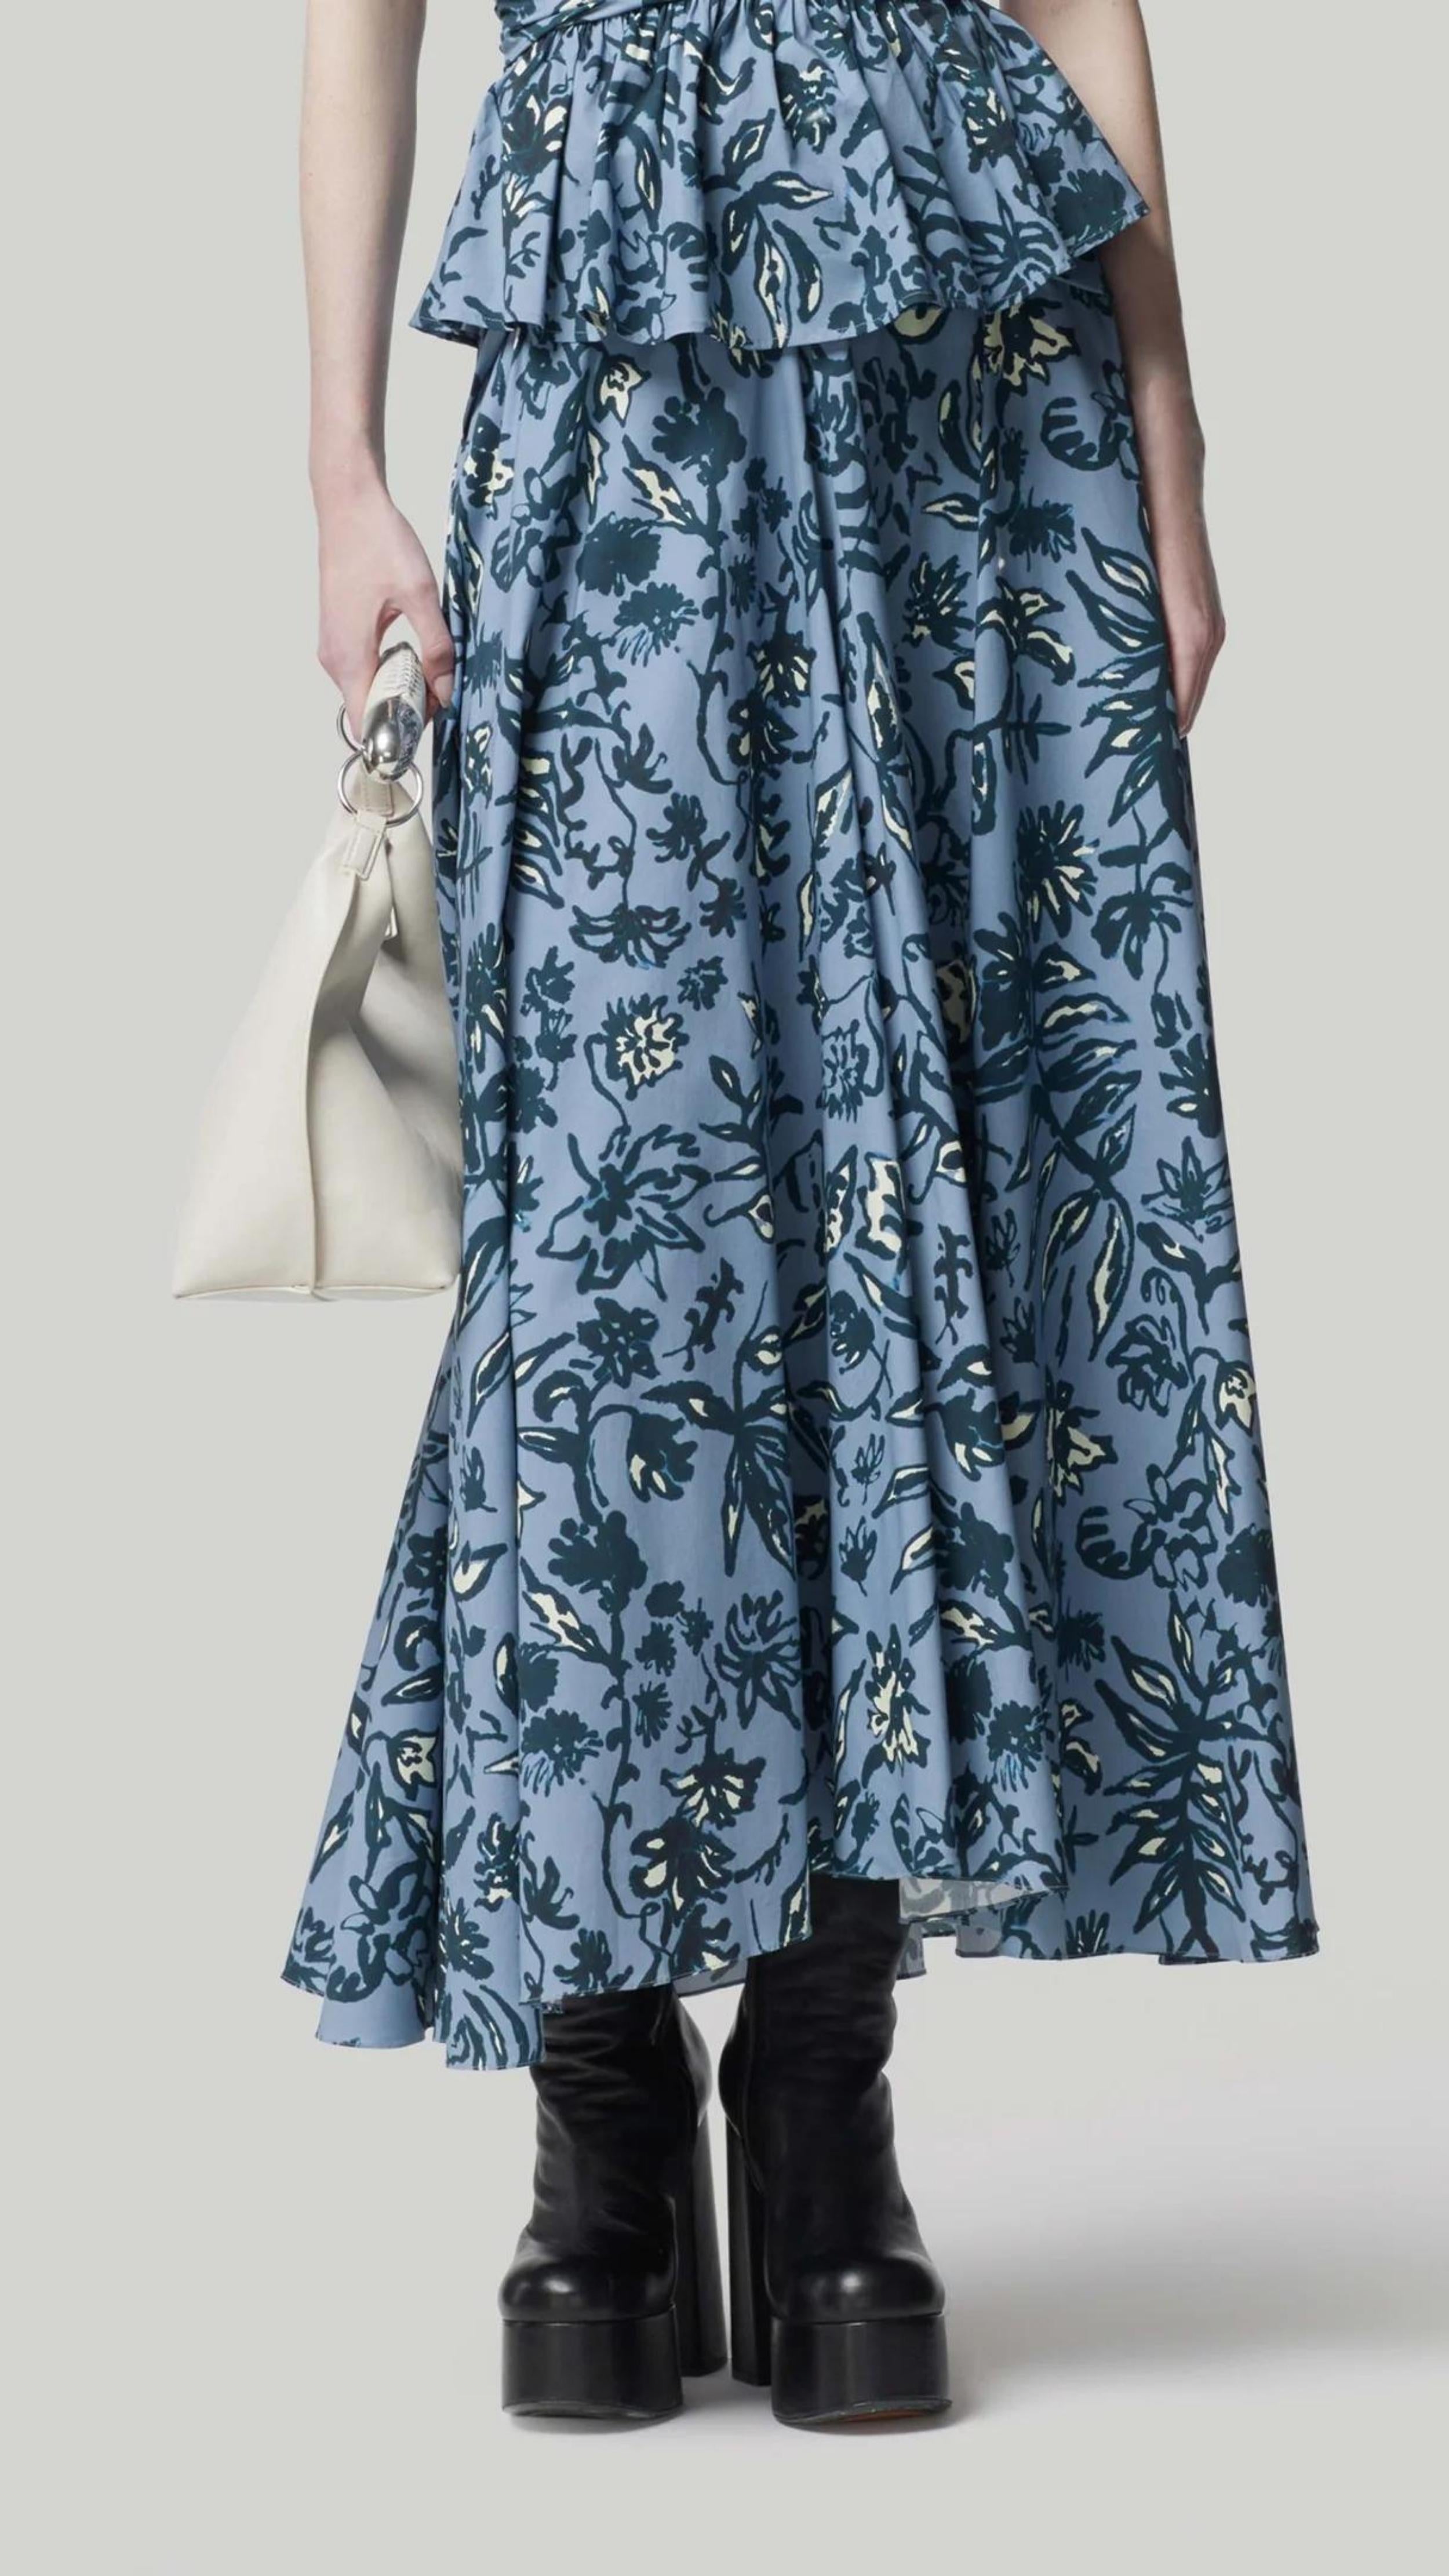 Altuzarra Pythia Skirt in Amsonia Shibori Flower. A midi length, aline style skirt with beautiful twist detail at the waist. Crafted in 100% cotton with a natural ecru color floral print over a light blue background. Shown on model facing front. Available at experience 27 in Madrid spain.